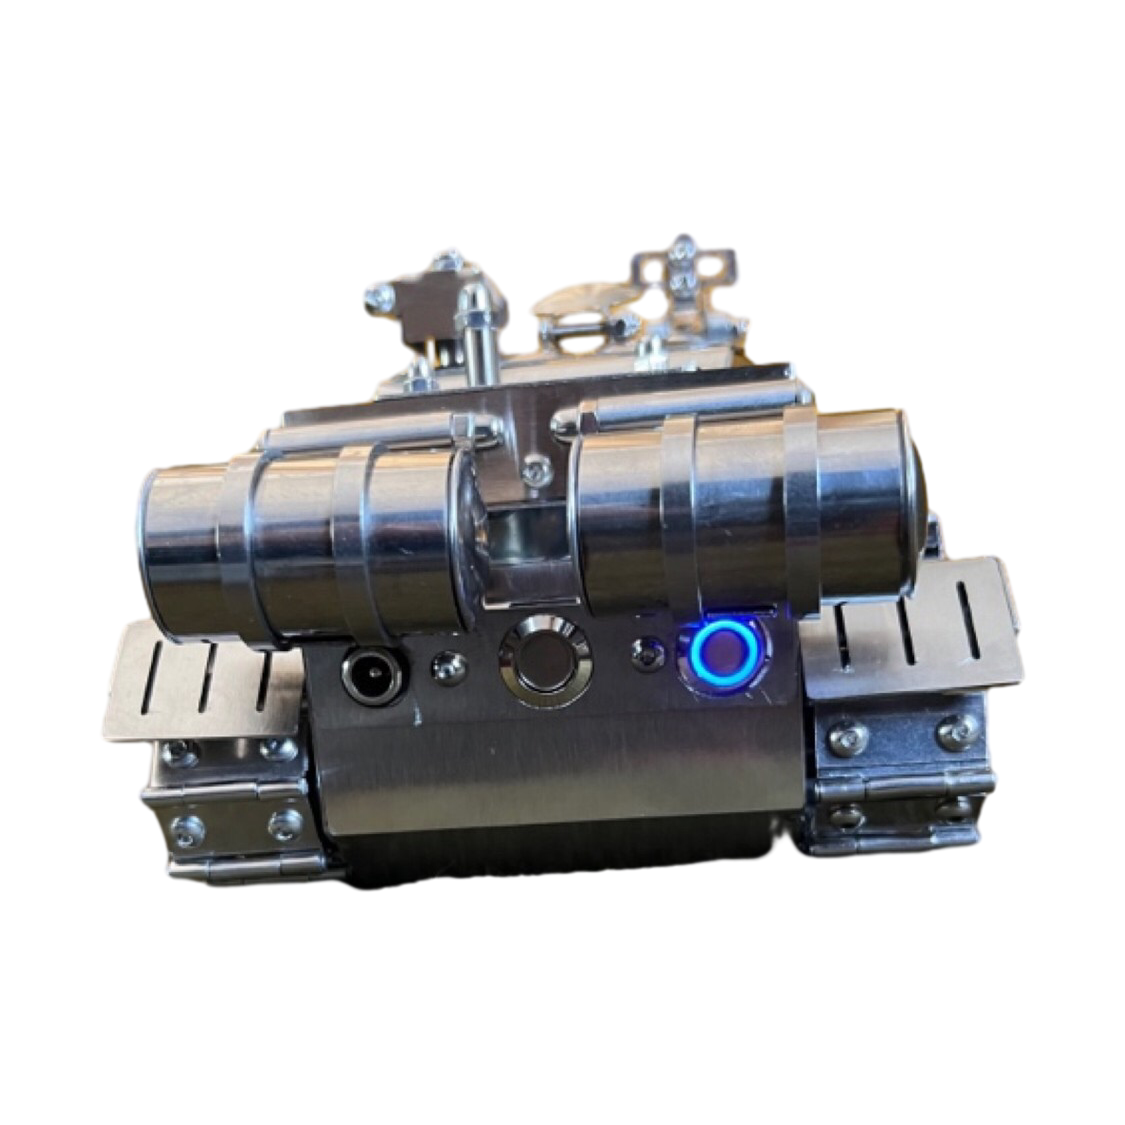 Steel Reign Precision Command - Stainless Steel Remote Control Tank!